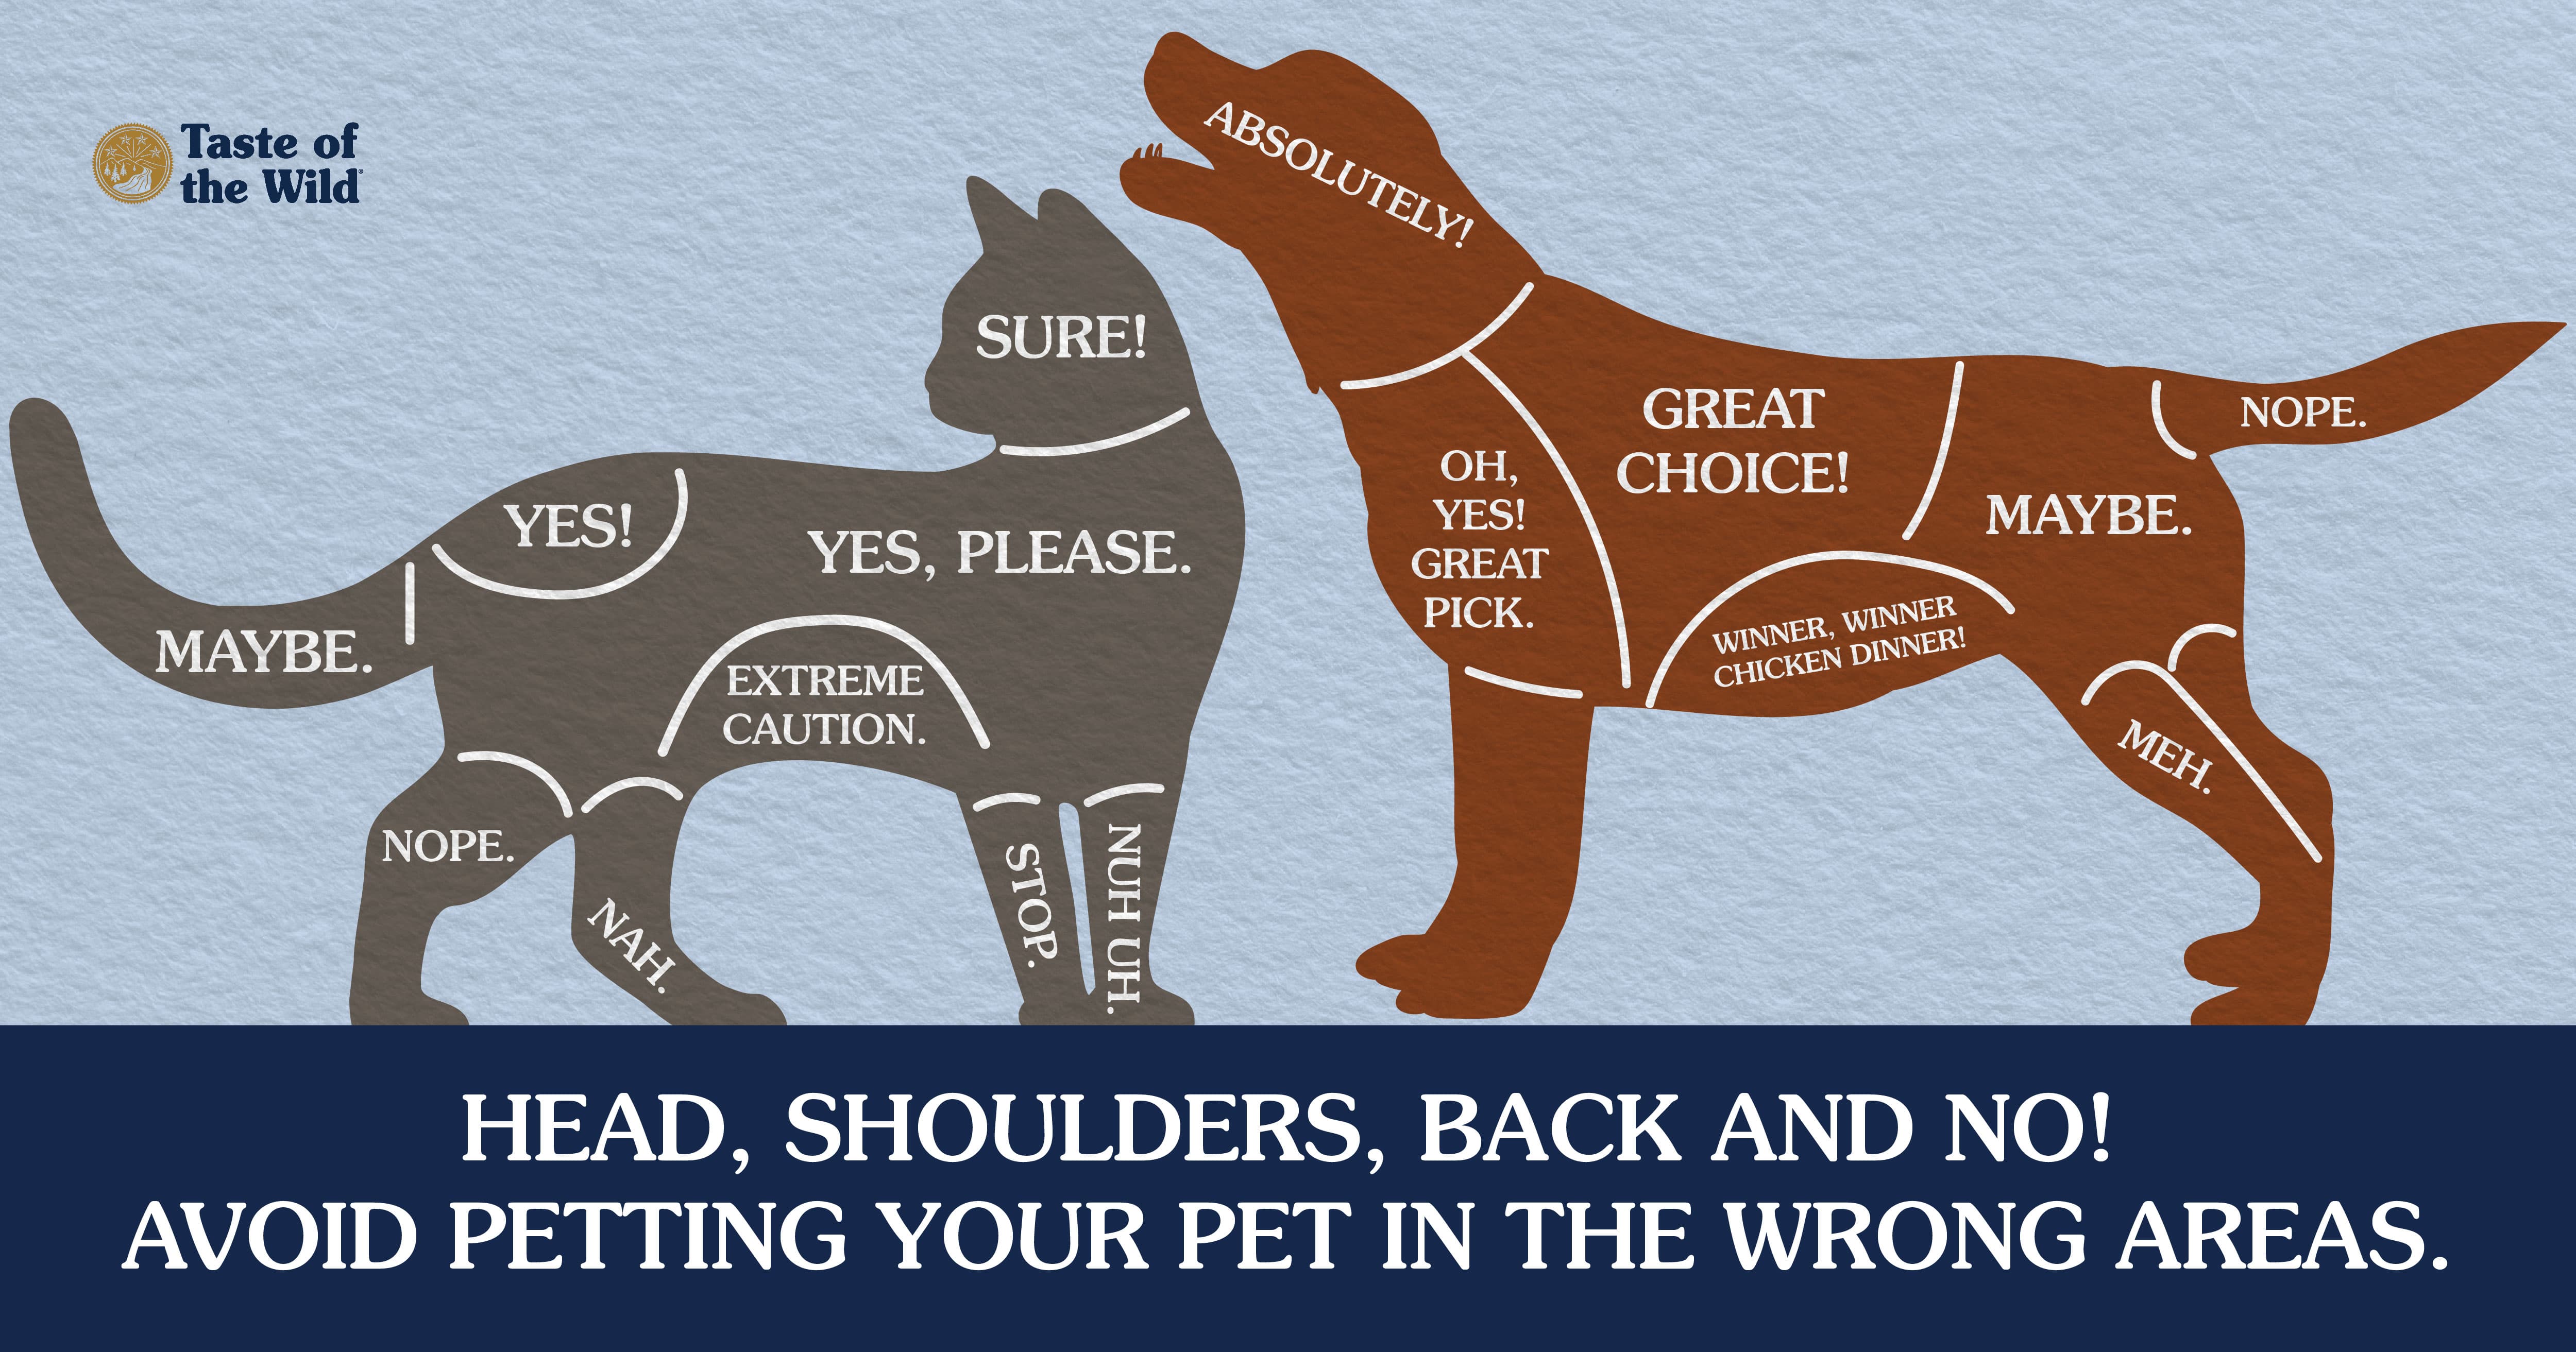 Head, shoulders, back and no! Avoid petting your pet in the wrong areas. | Taste of the Wild